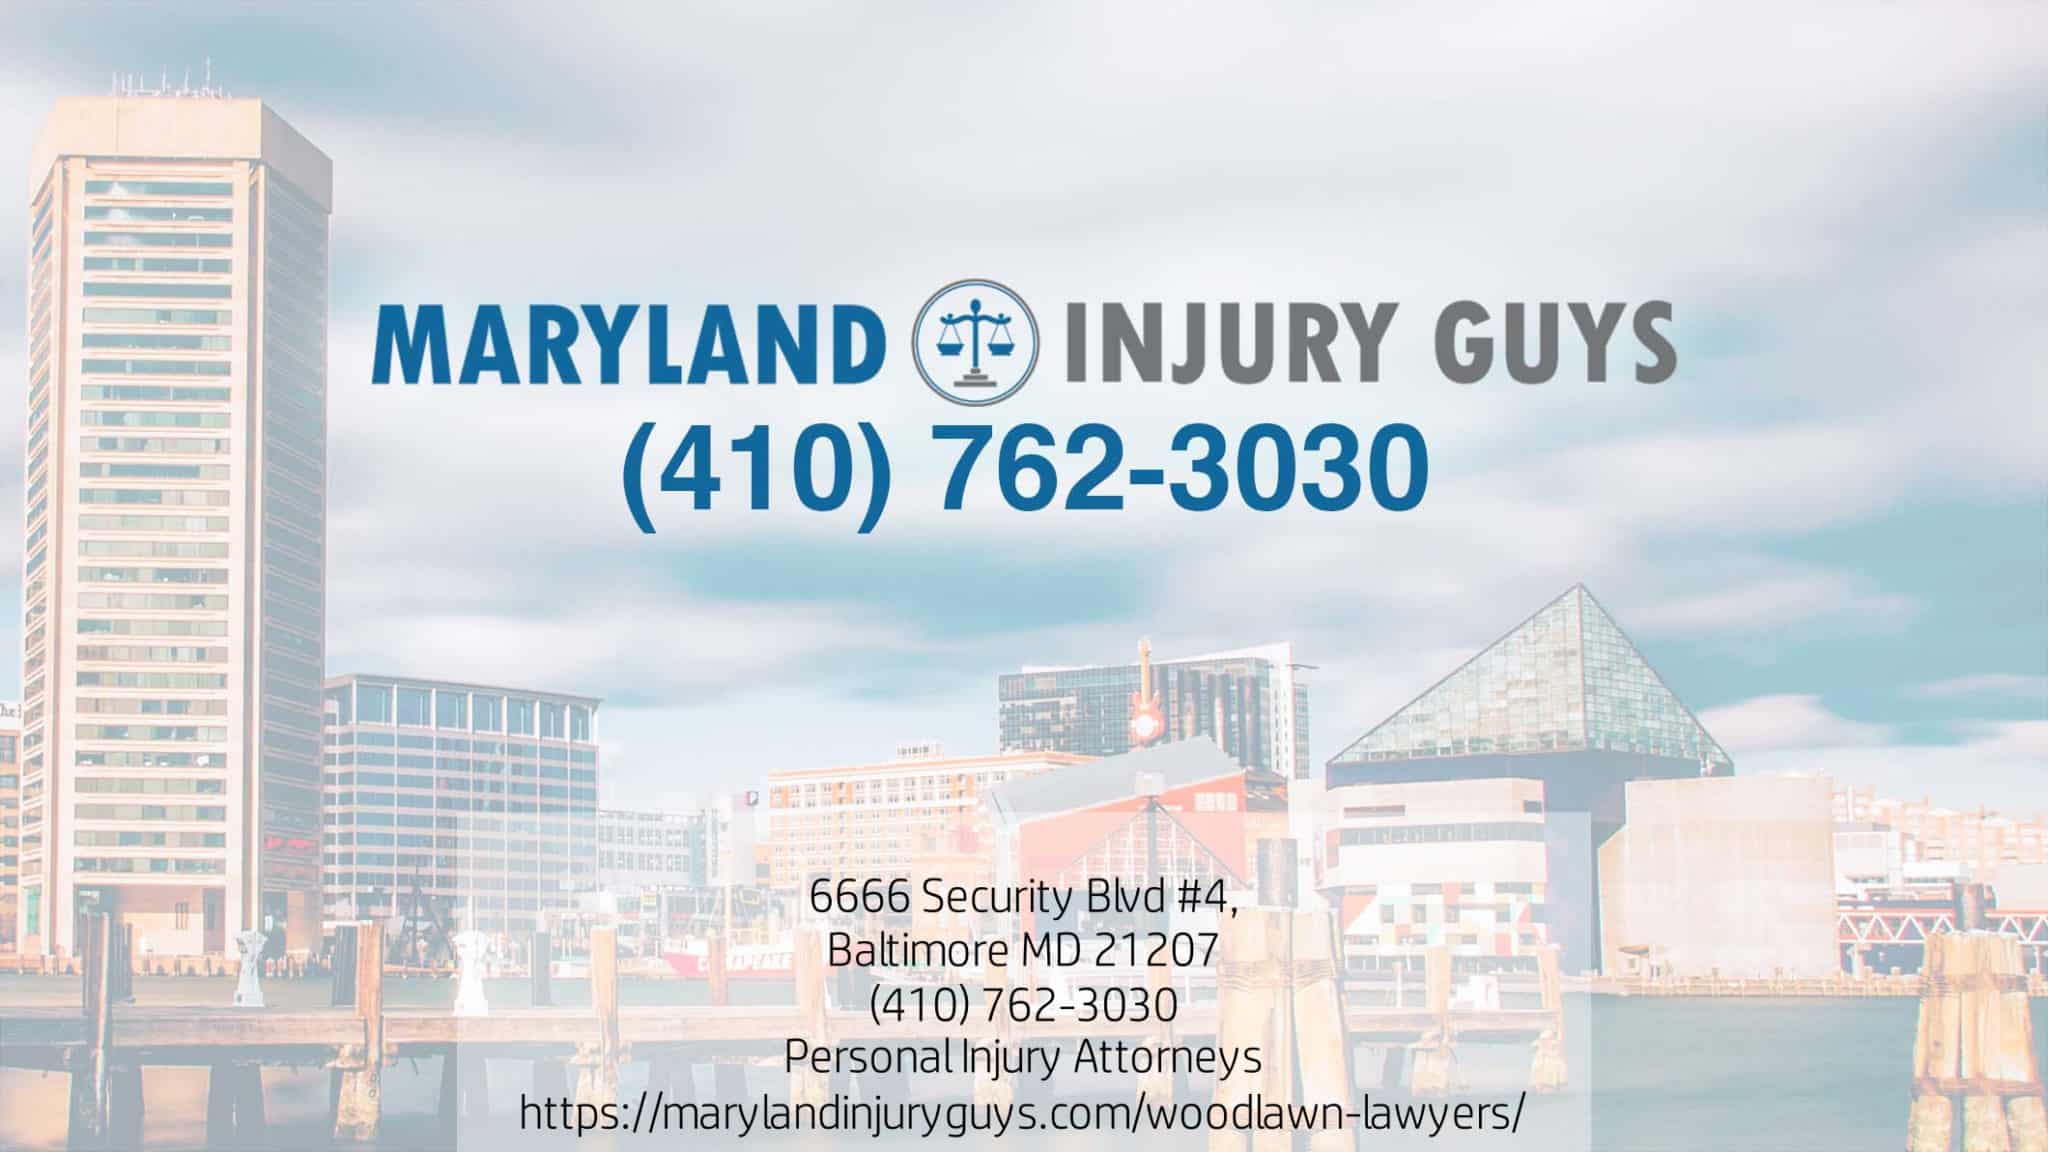 Workers-Compensation-Lawyer-Near-Me-Woodlawn-Maryland-Injury-Guys-scaled-1.jpg